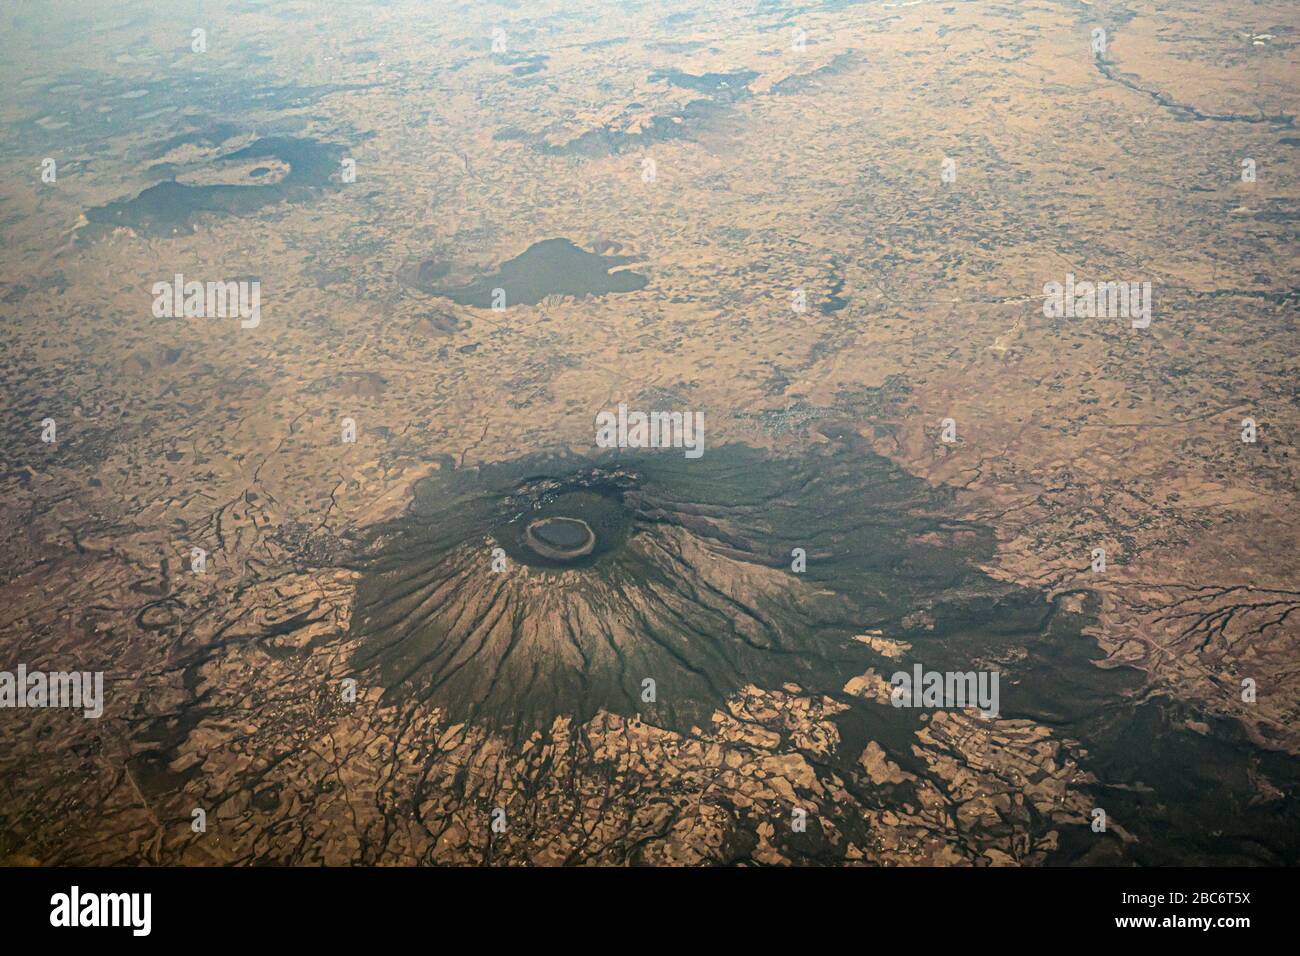 Aerial view of a volcano crater. Photographed in Ethiopia Stock Photo